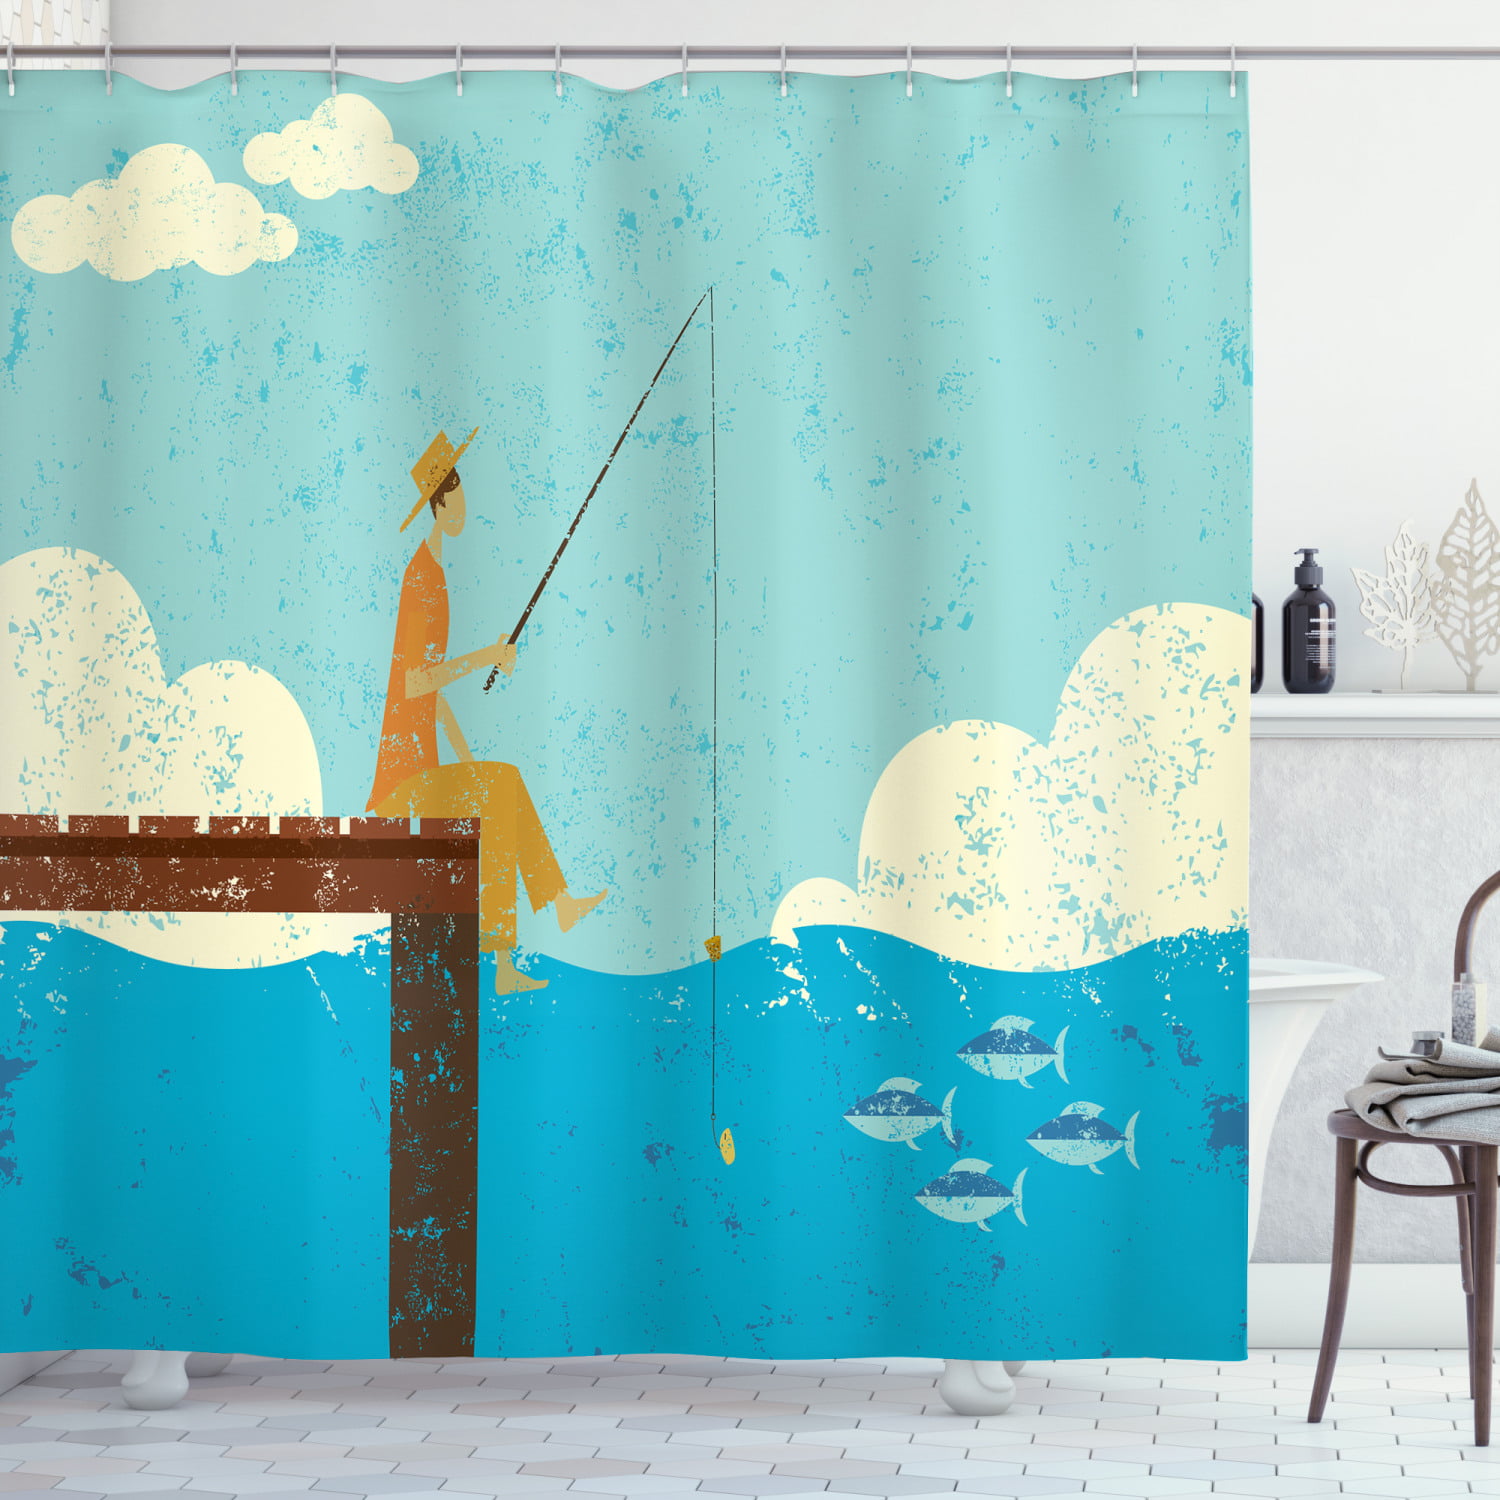 Fish Shower Curtain, Fishing Man Figure with Rod Sitting on the Pier Little  Fishes in the Sea Grunge Print, Fabric Bathroom Set with Hooks, 69W X 70L  Inches, Multicolor, by Ambesonne 